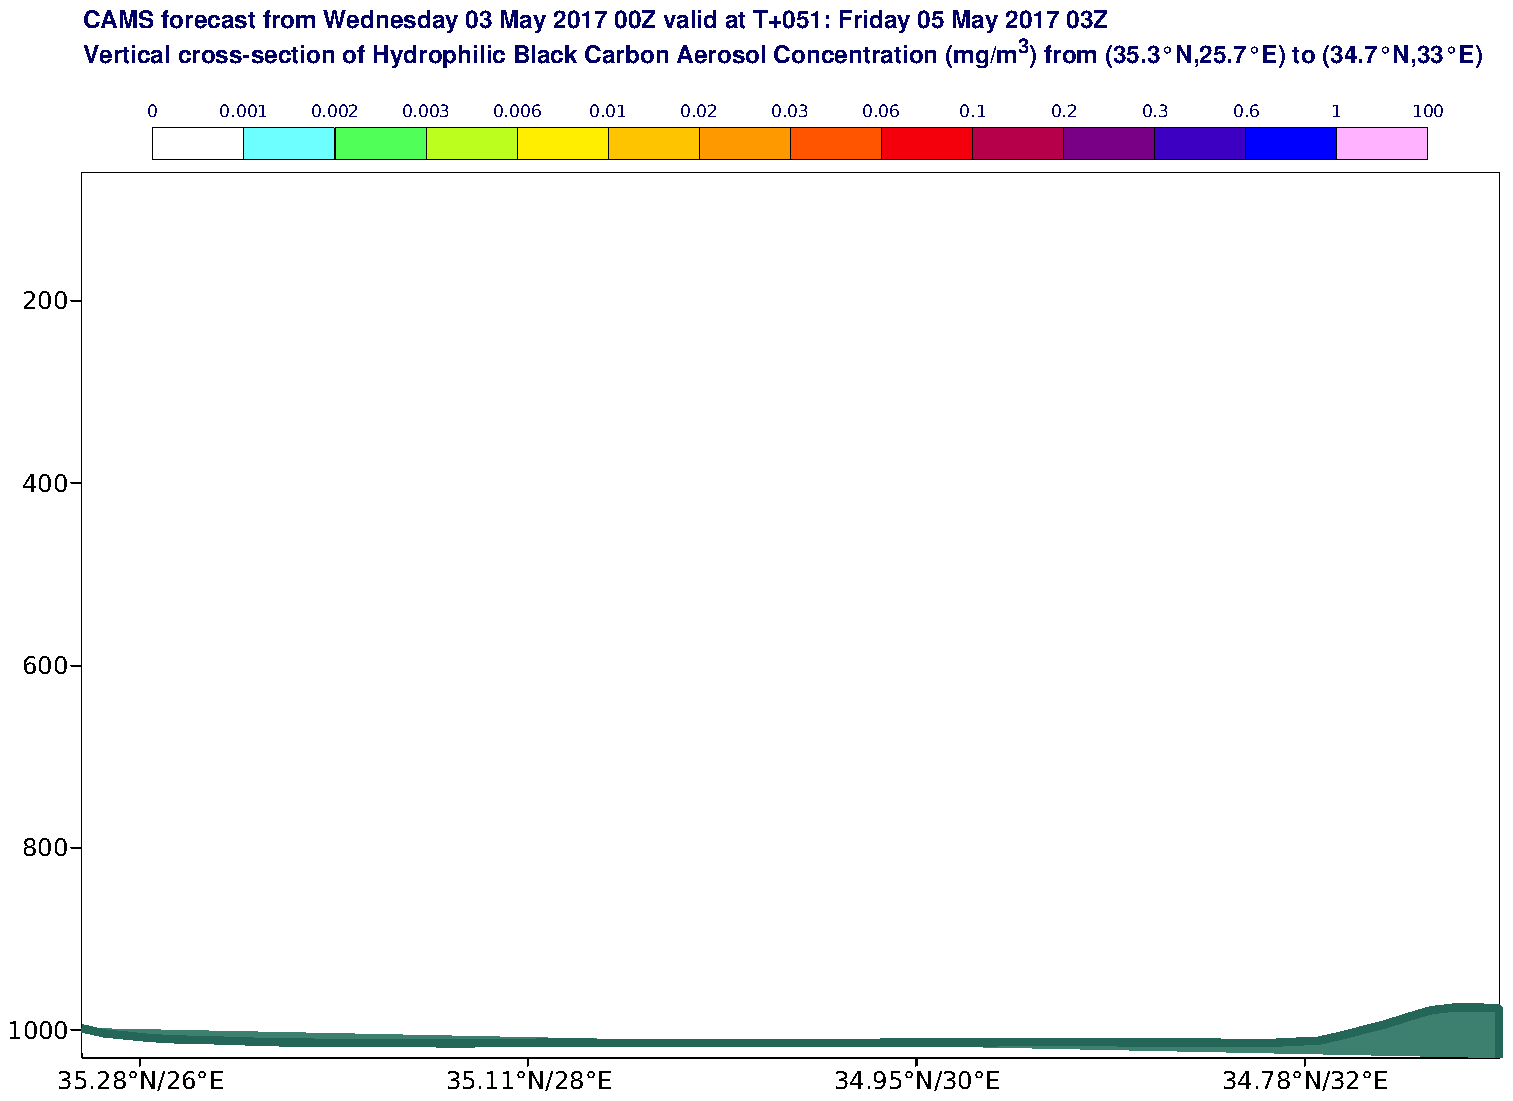 Vertical cross-section of Hydrophilic Black Carbon Aerosol Concentration (mg/m3) valid at T51 - 2017-05-05 03:00